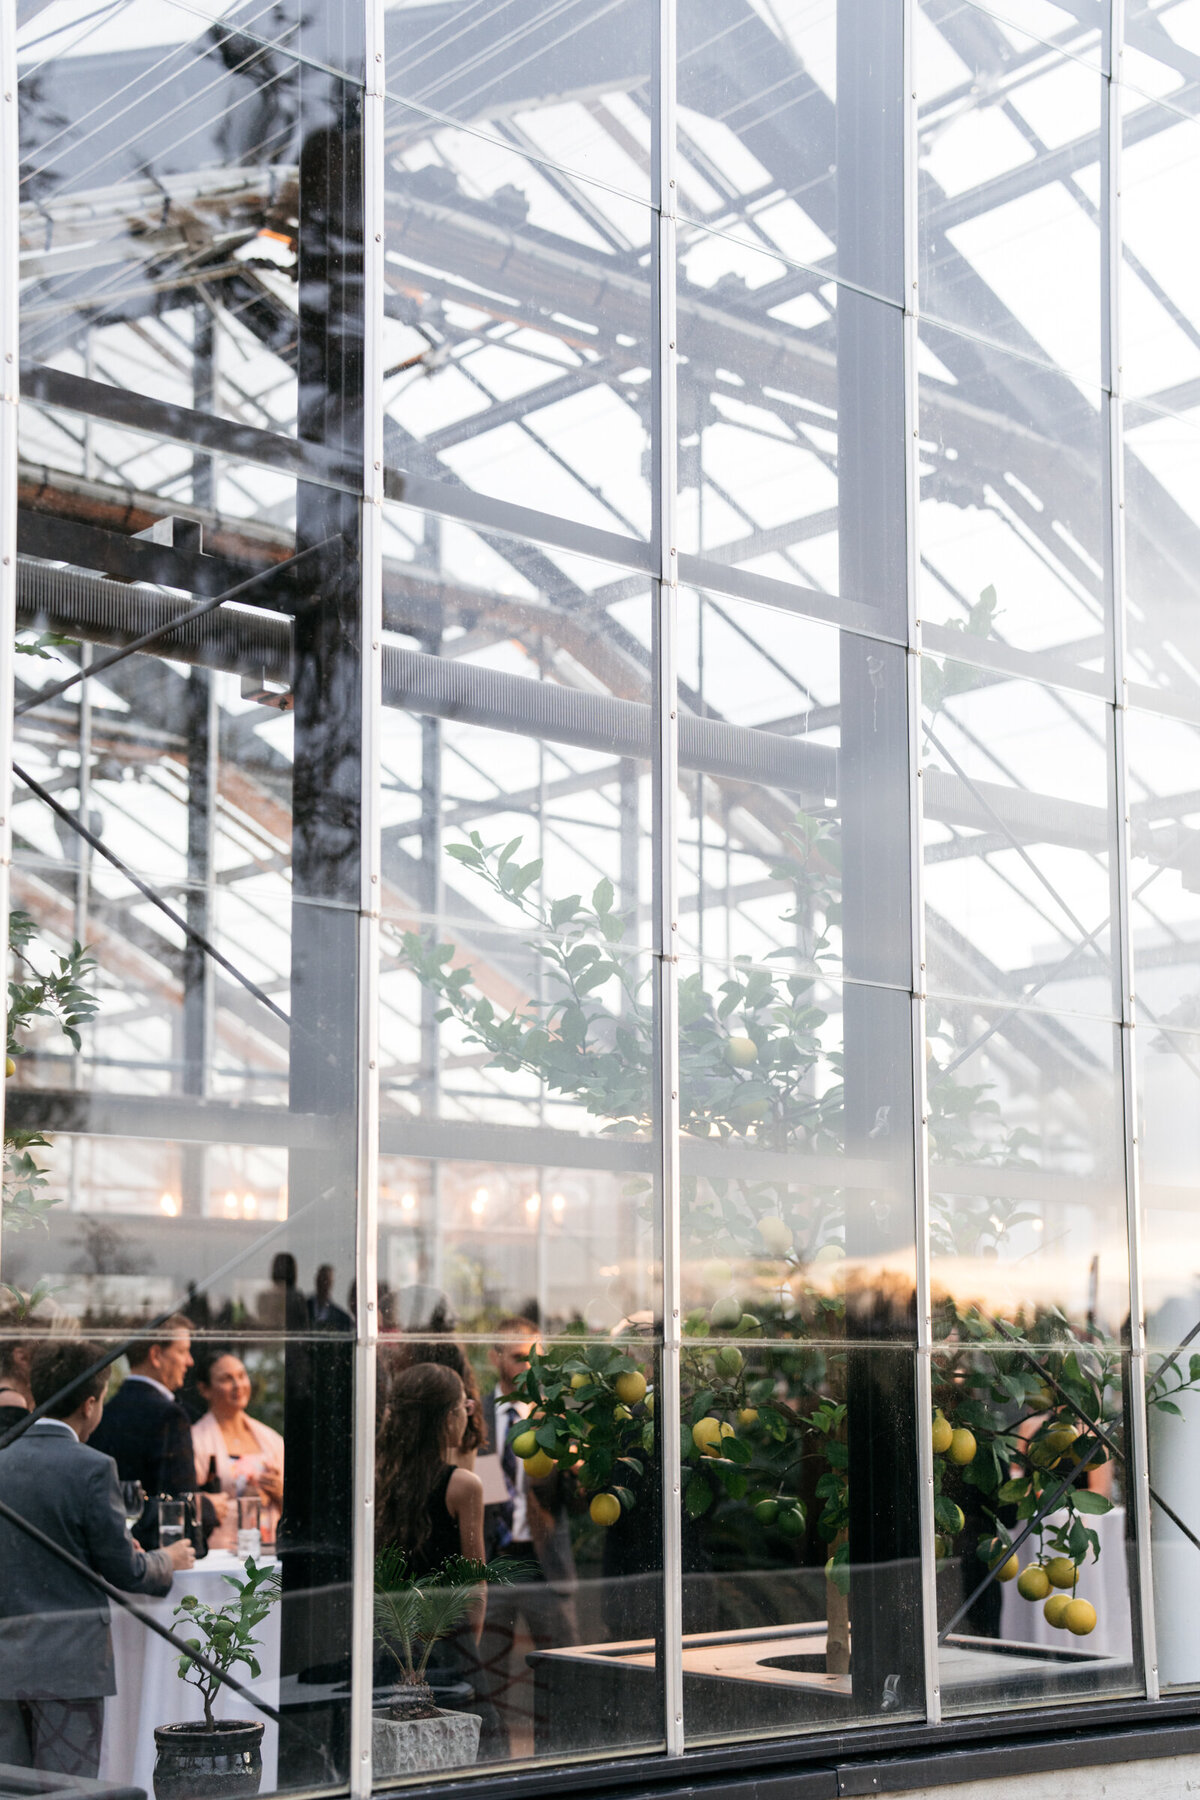 guests socializing inside a greenhouse during cocktail hour at a wedding in louisville kentucky